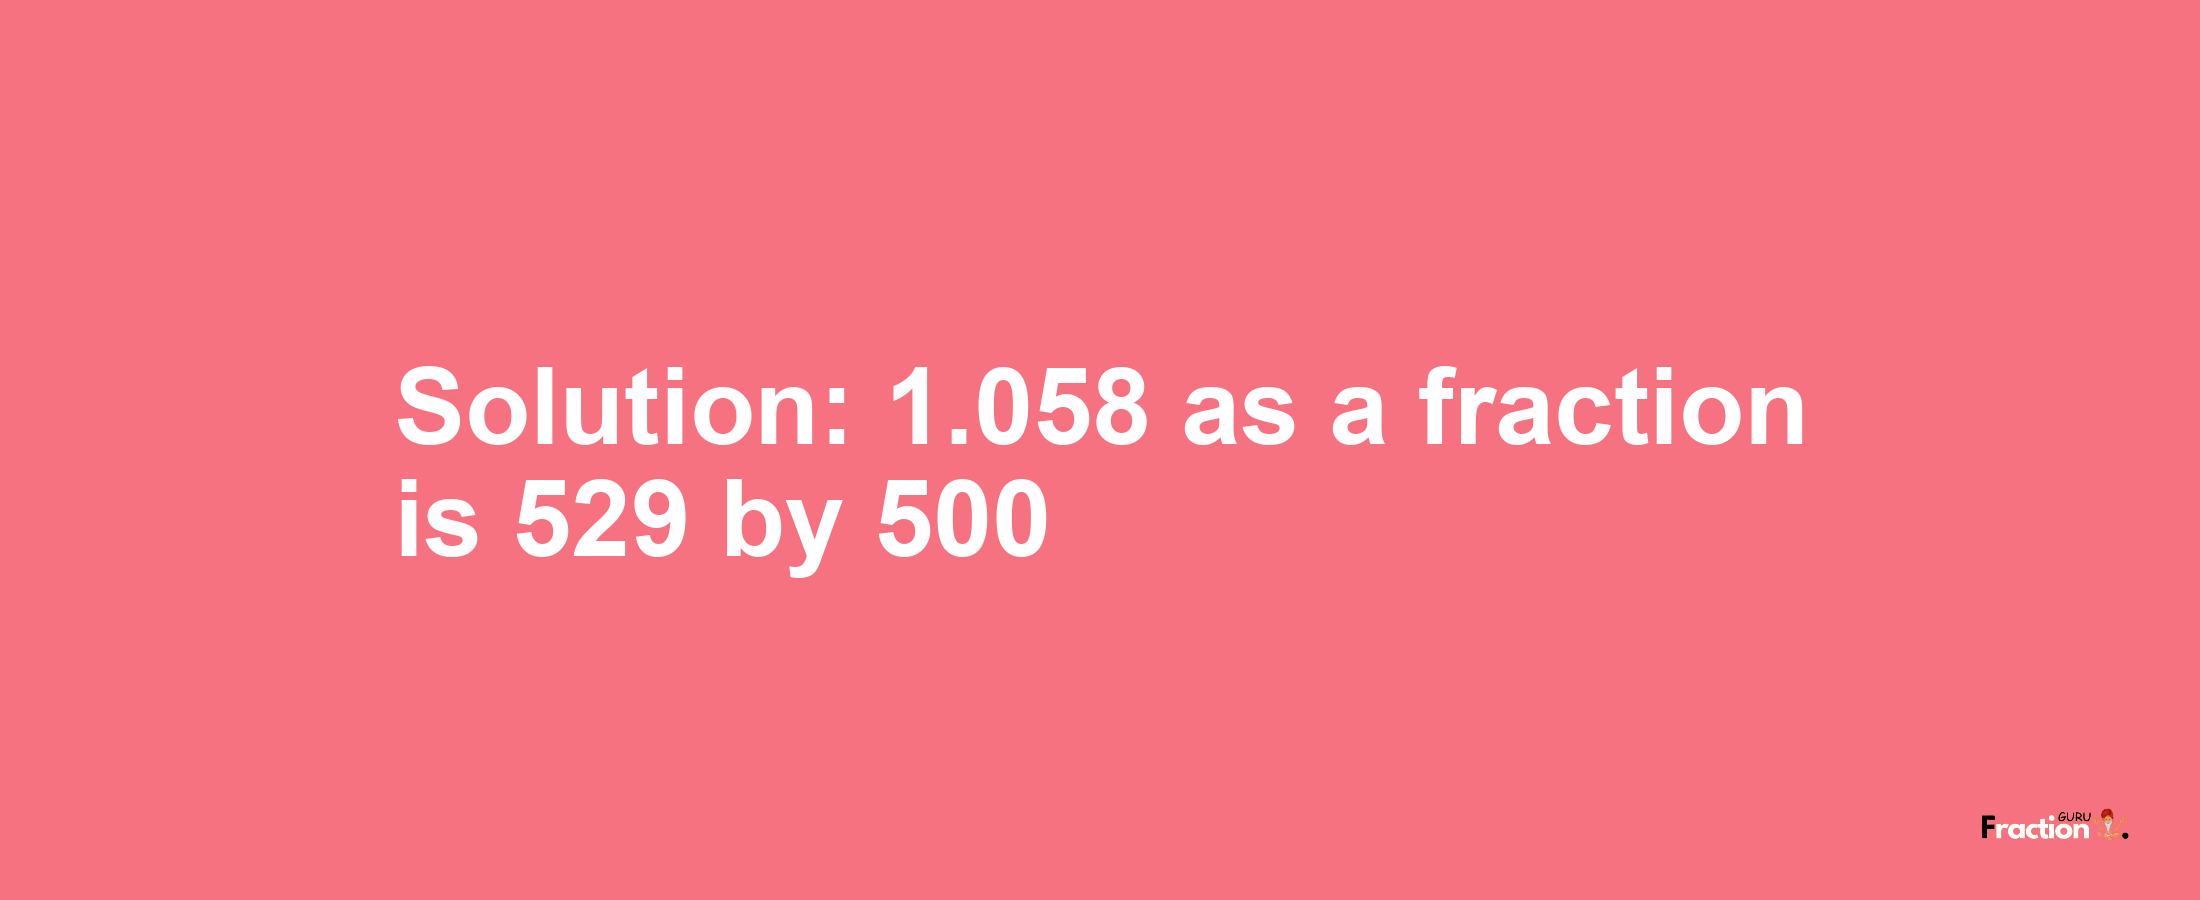 Solution:1.058 as a fraction is 529/500